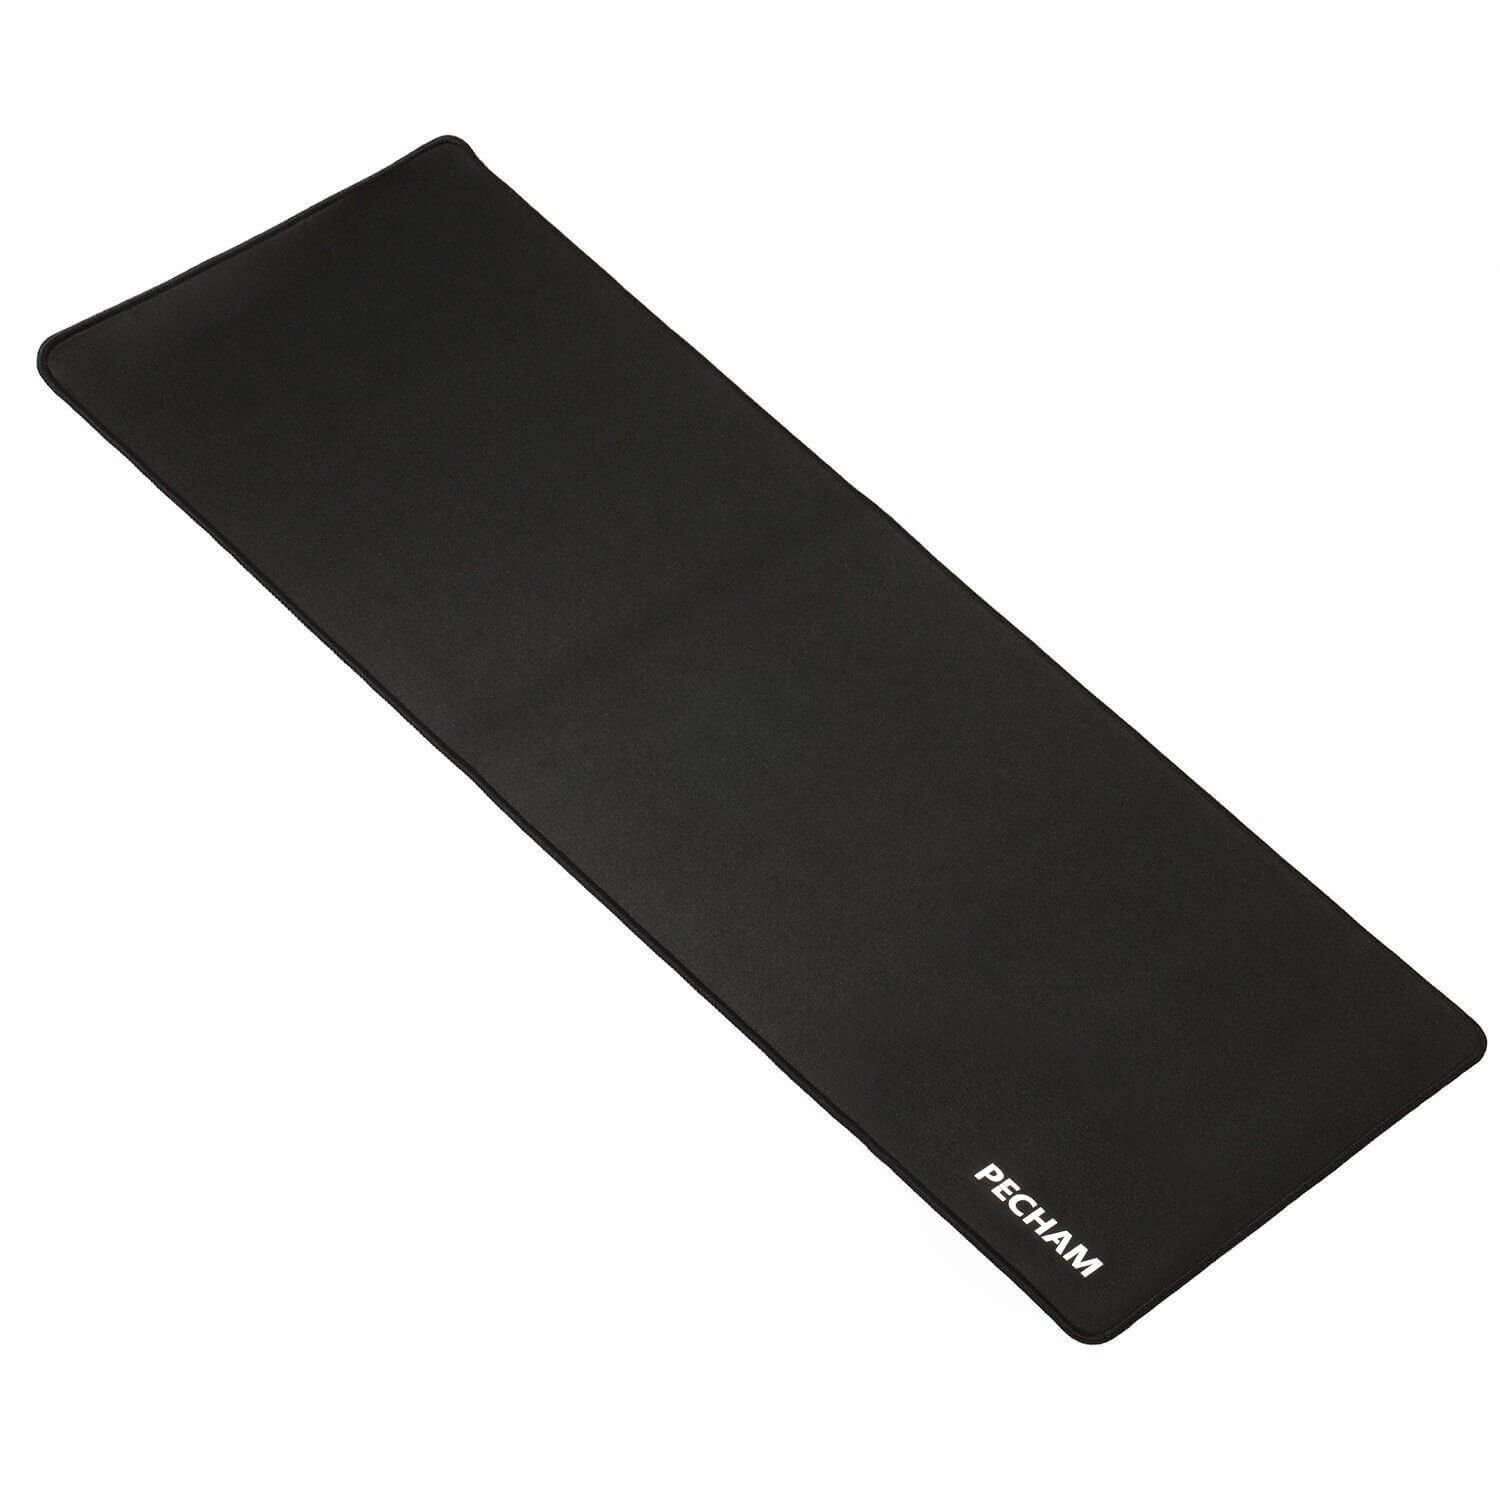 PECHAM Extended Gaming Mouse Pad